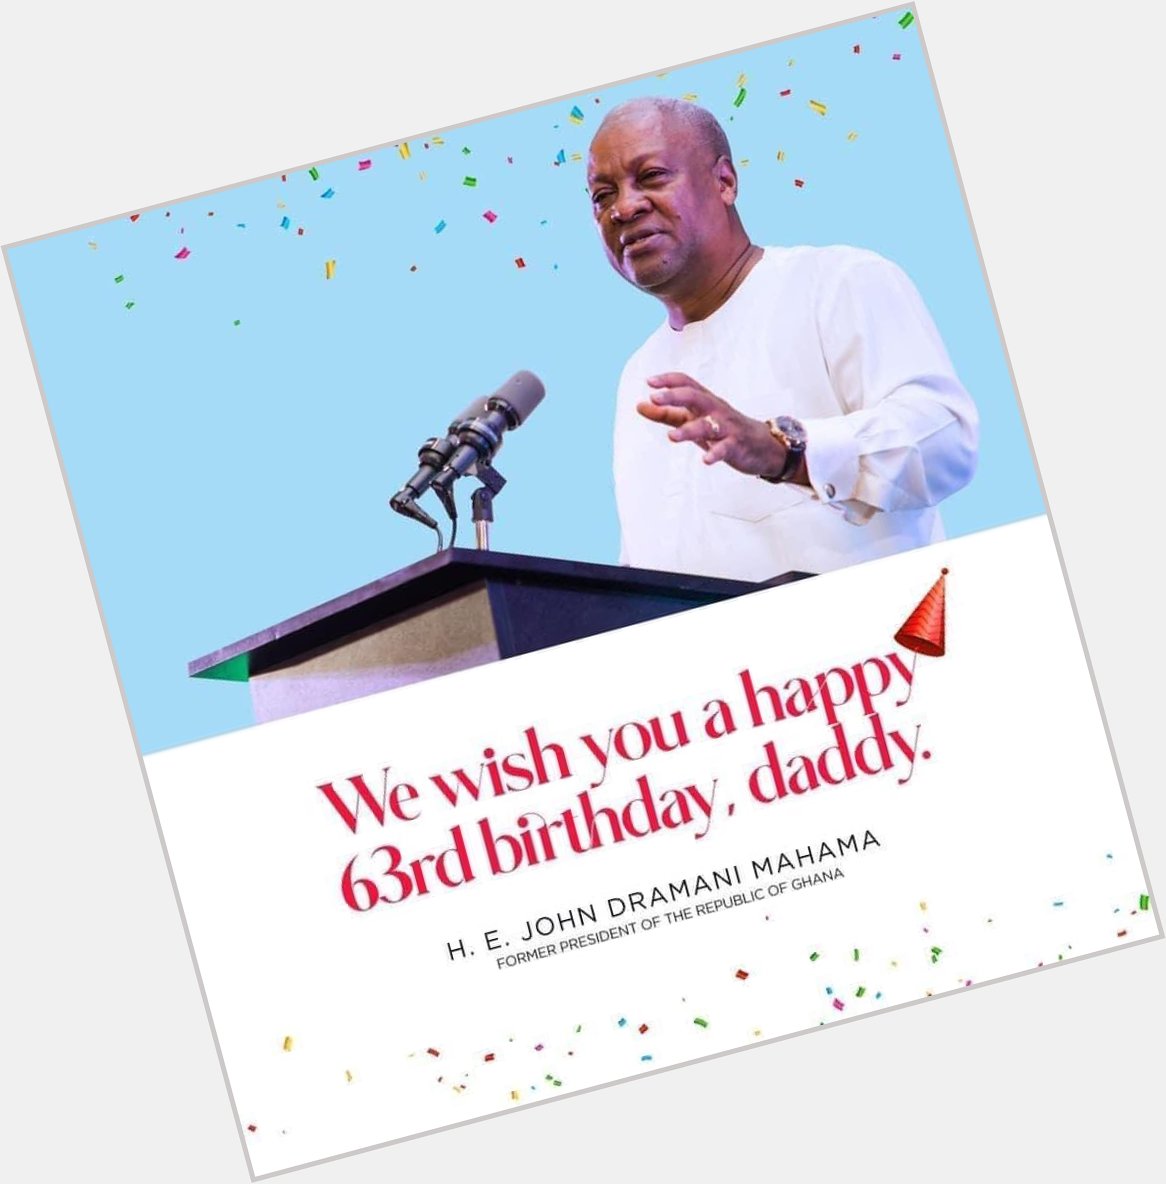 Happy birthday H.E John Dramani Mahama.
God bless you for a blessing to the people of Ghana. 